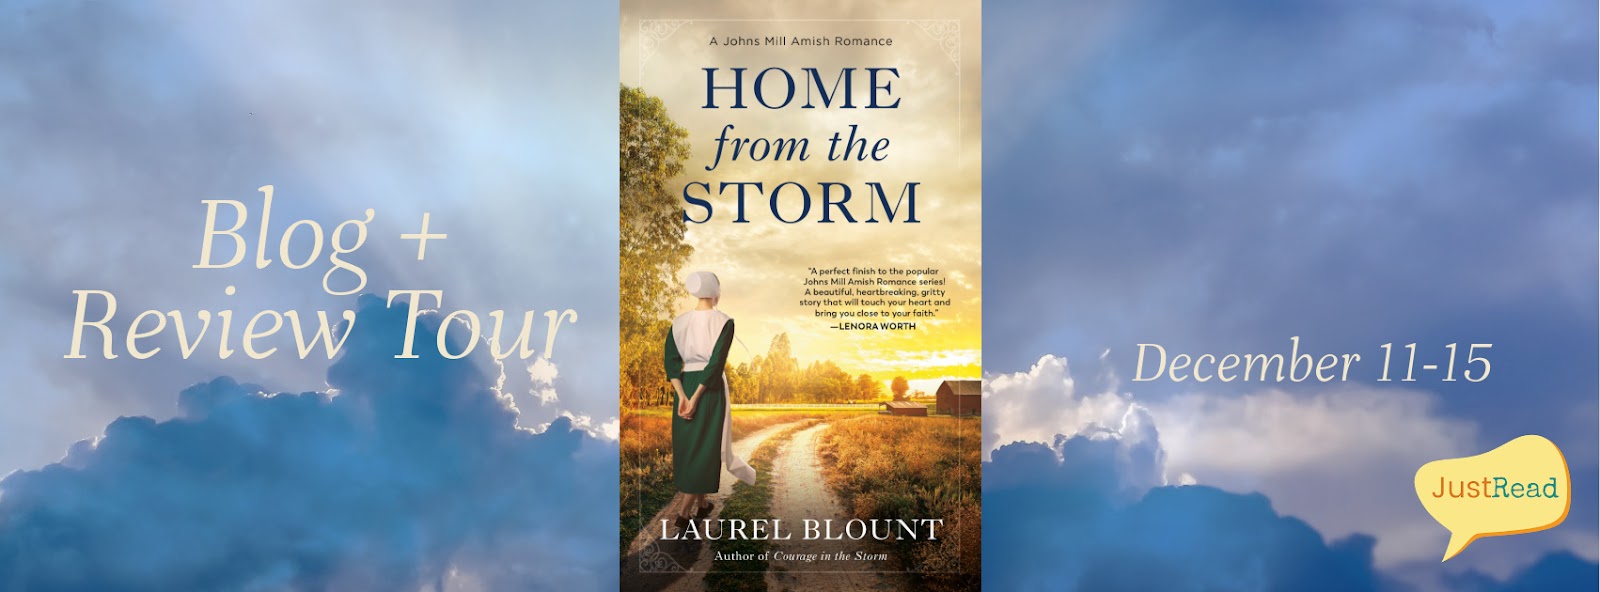 Home from the Storm JustRead Blog + Review Tour